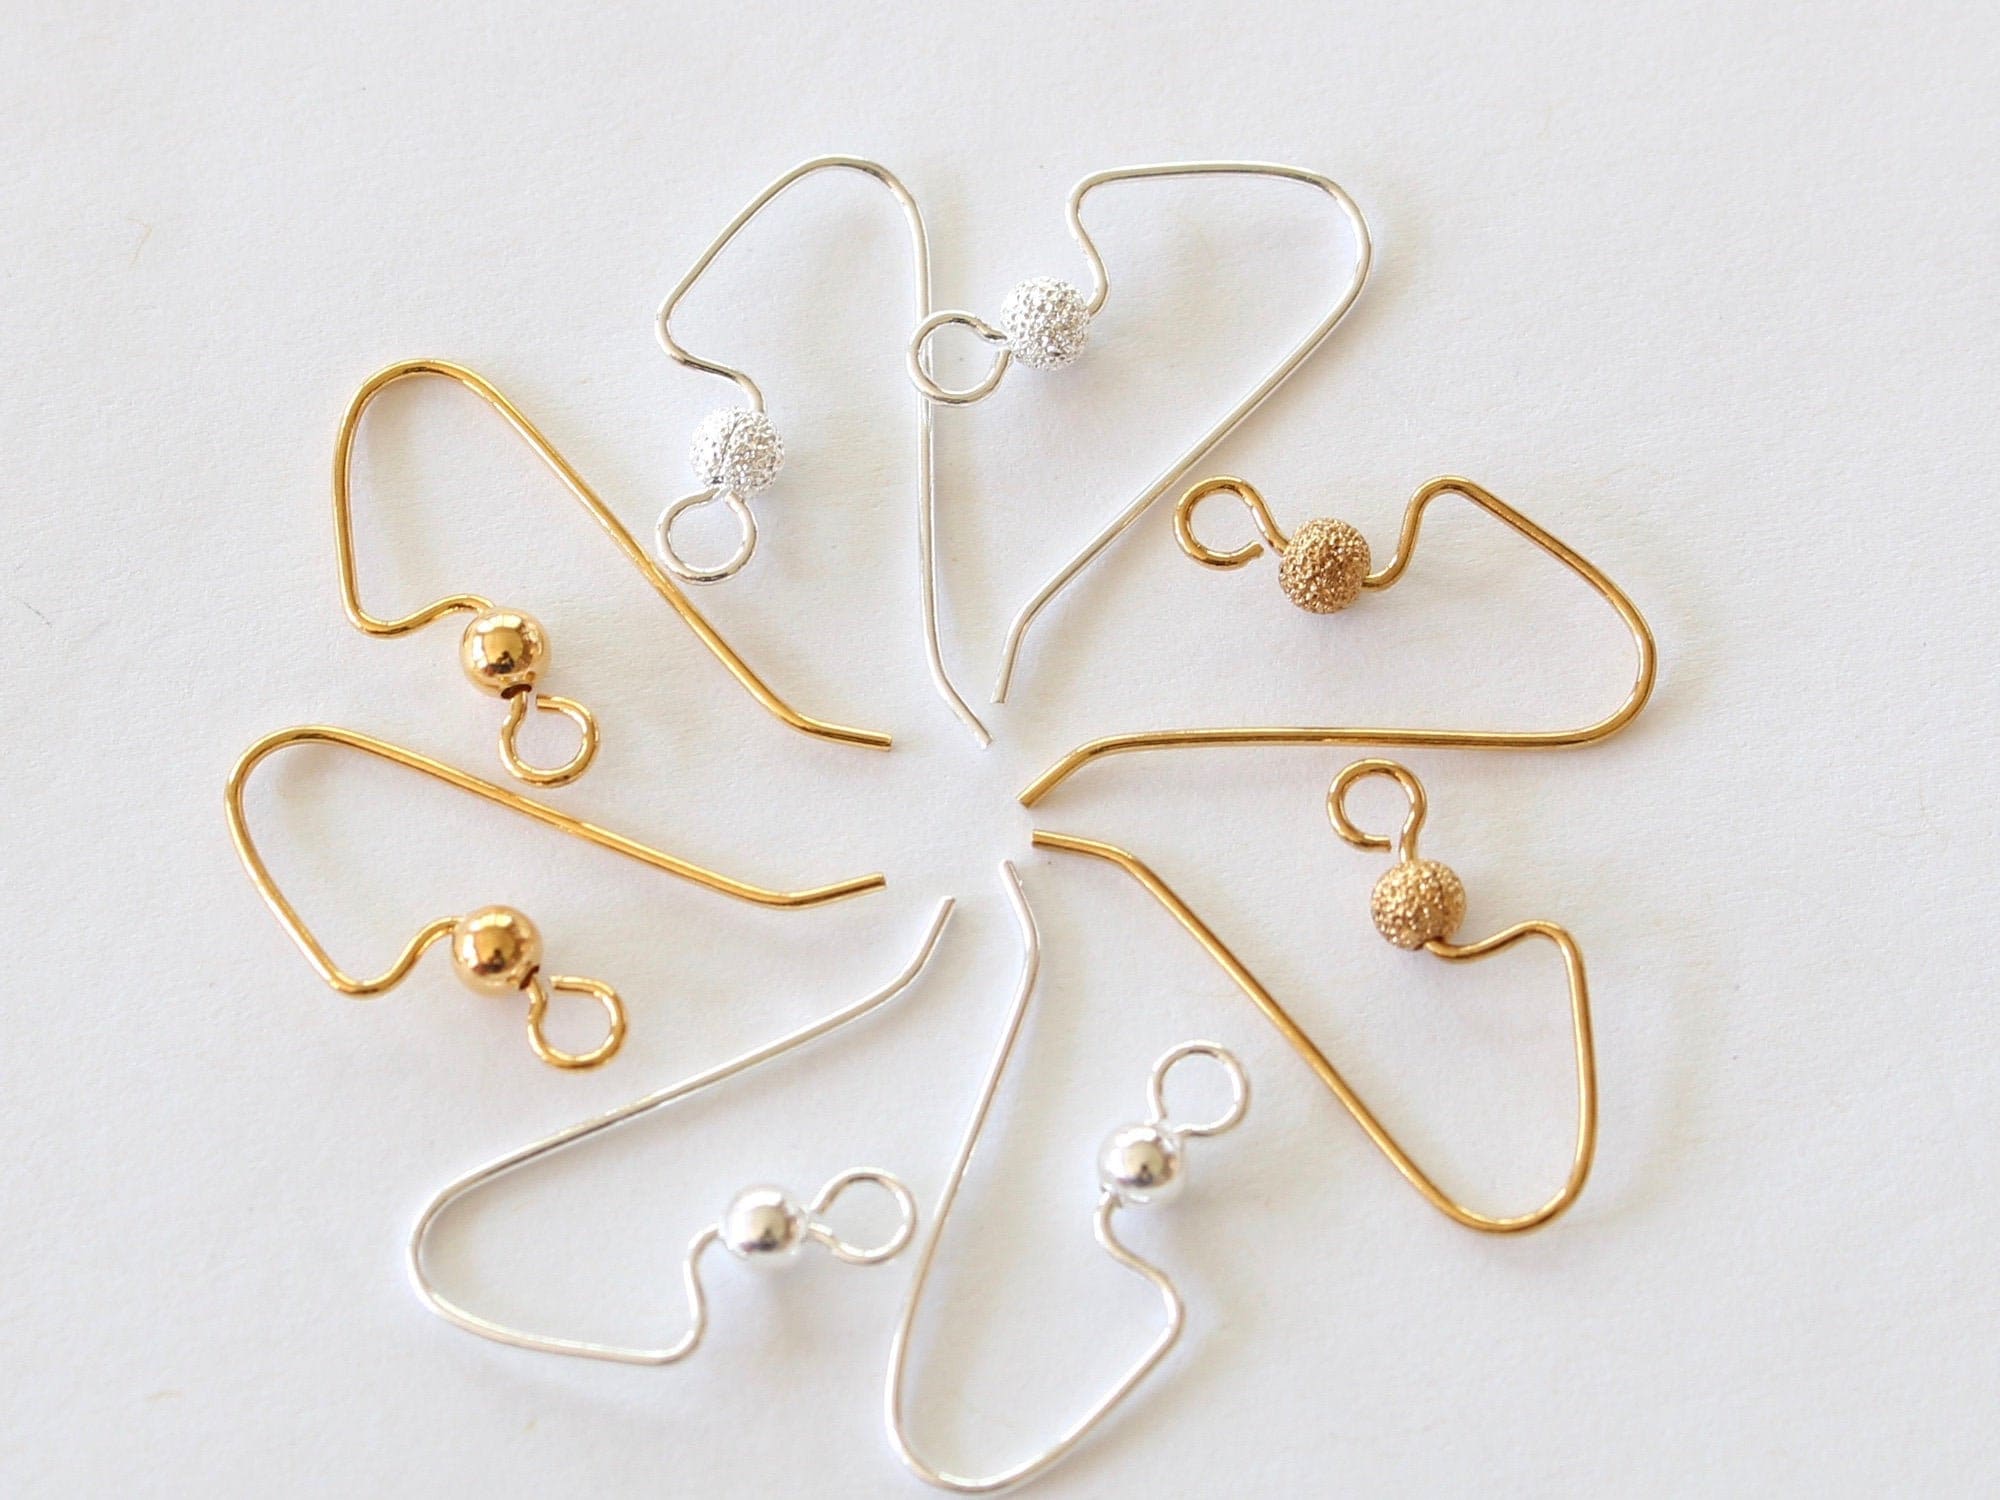 Silver Gold Color Copper Hoops Earrings Kit Earrings Clasps Hooks Ear Wire  Hoops Earrings Wires For